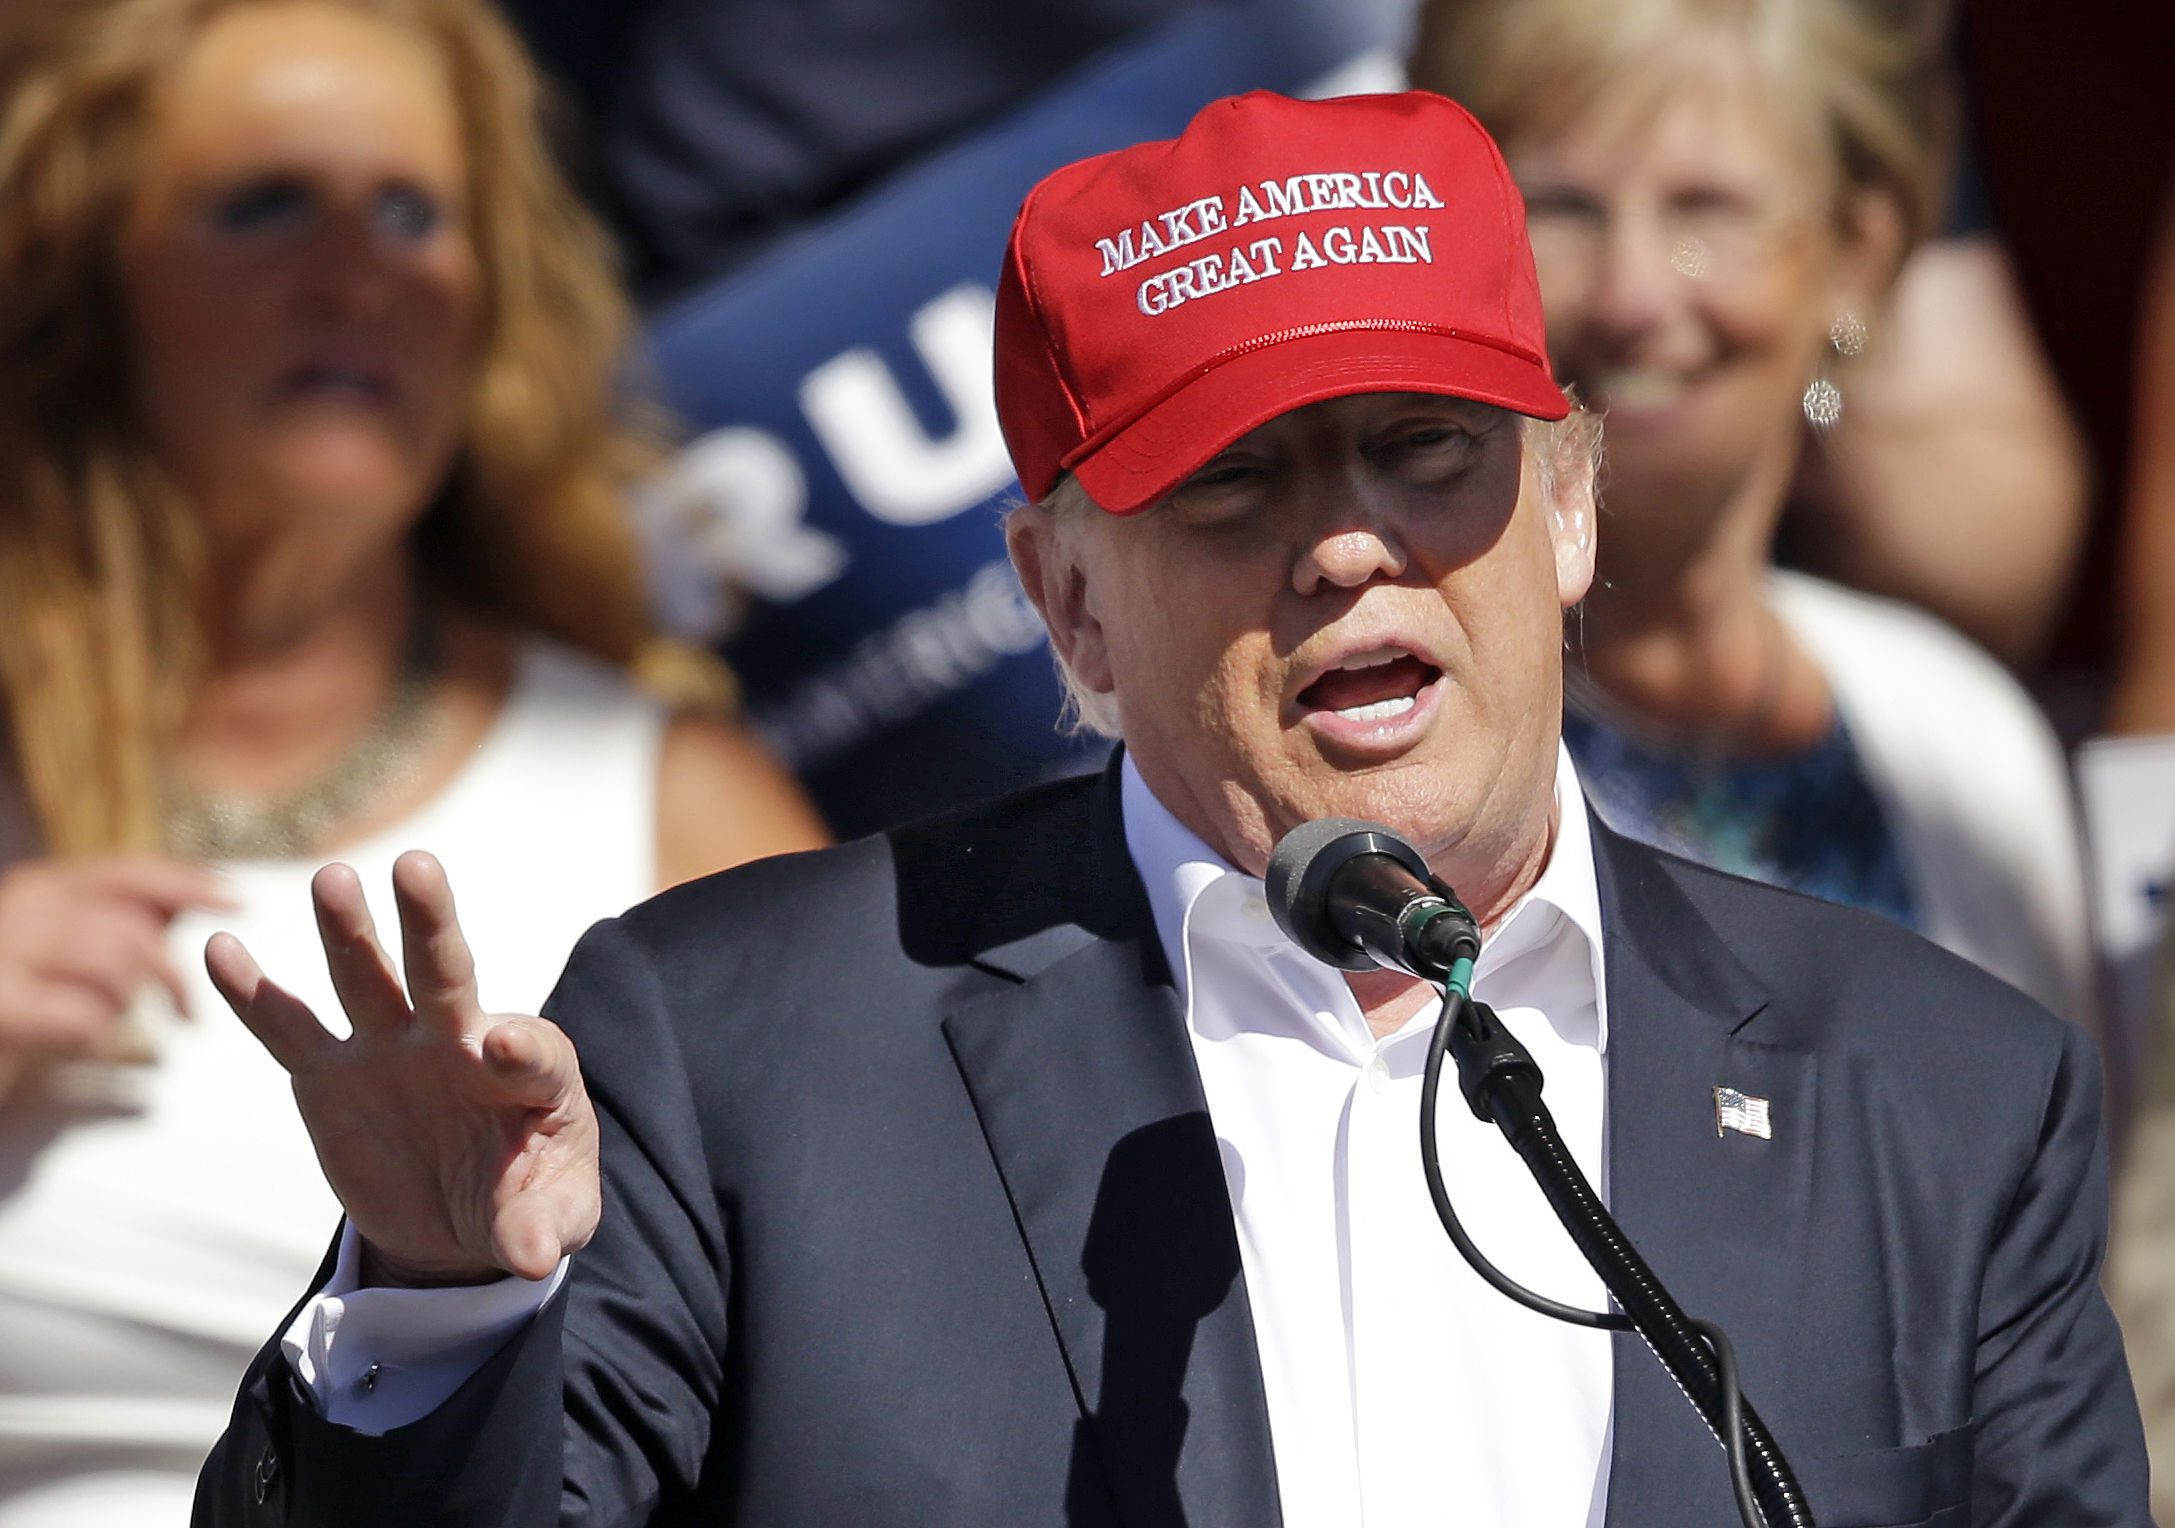 Republican presidential candidate Donald Trump speaks at a rally on Saturday, May 7, 2016.